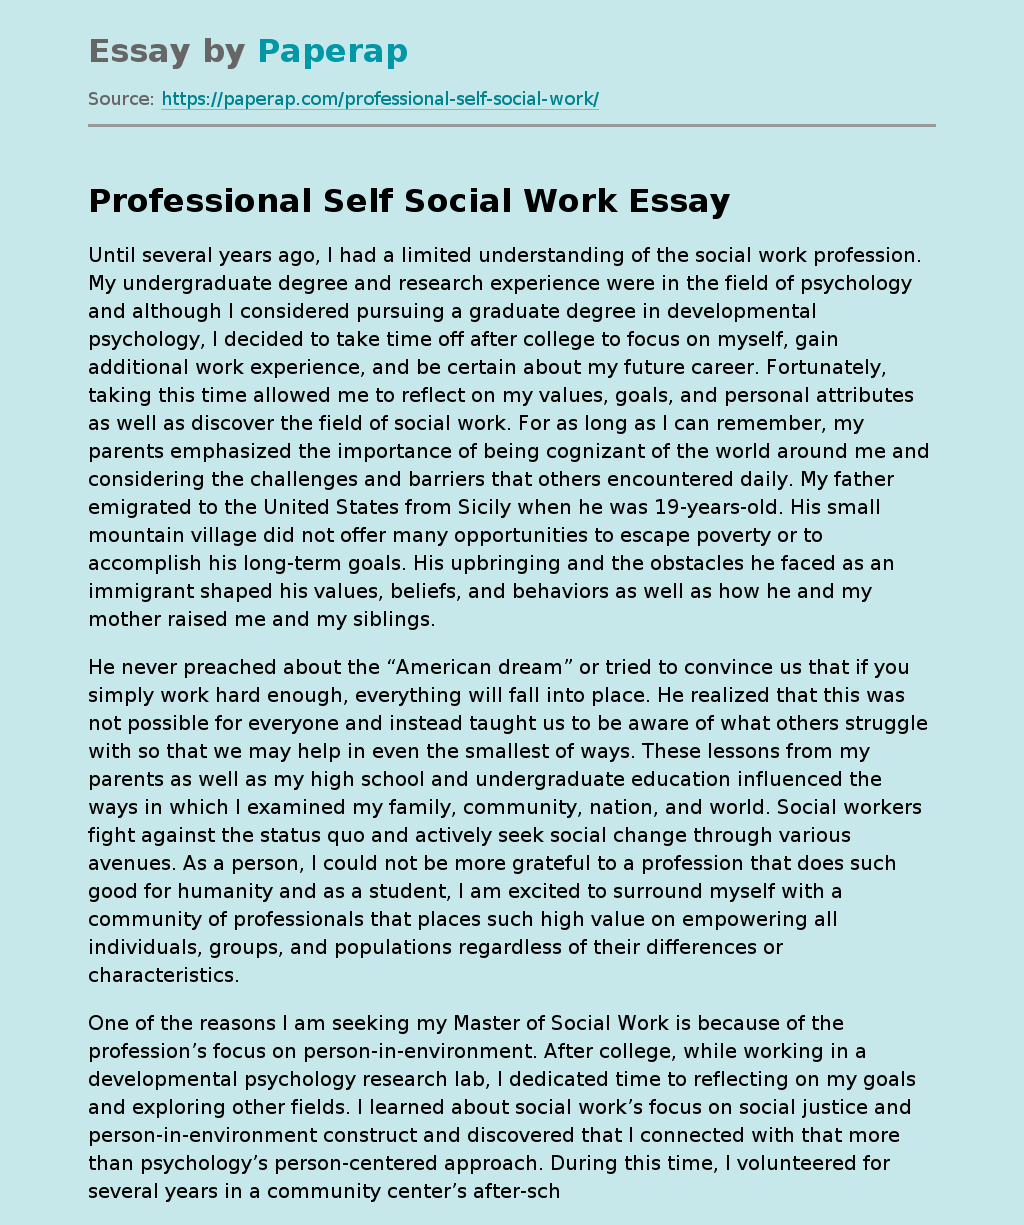 personal and professional development in social work essay